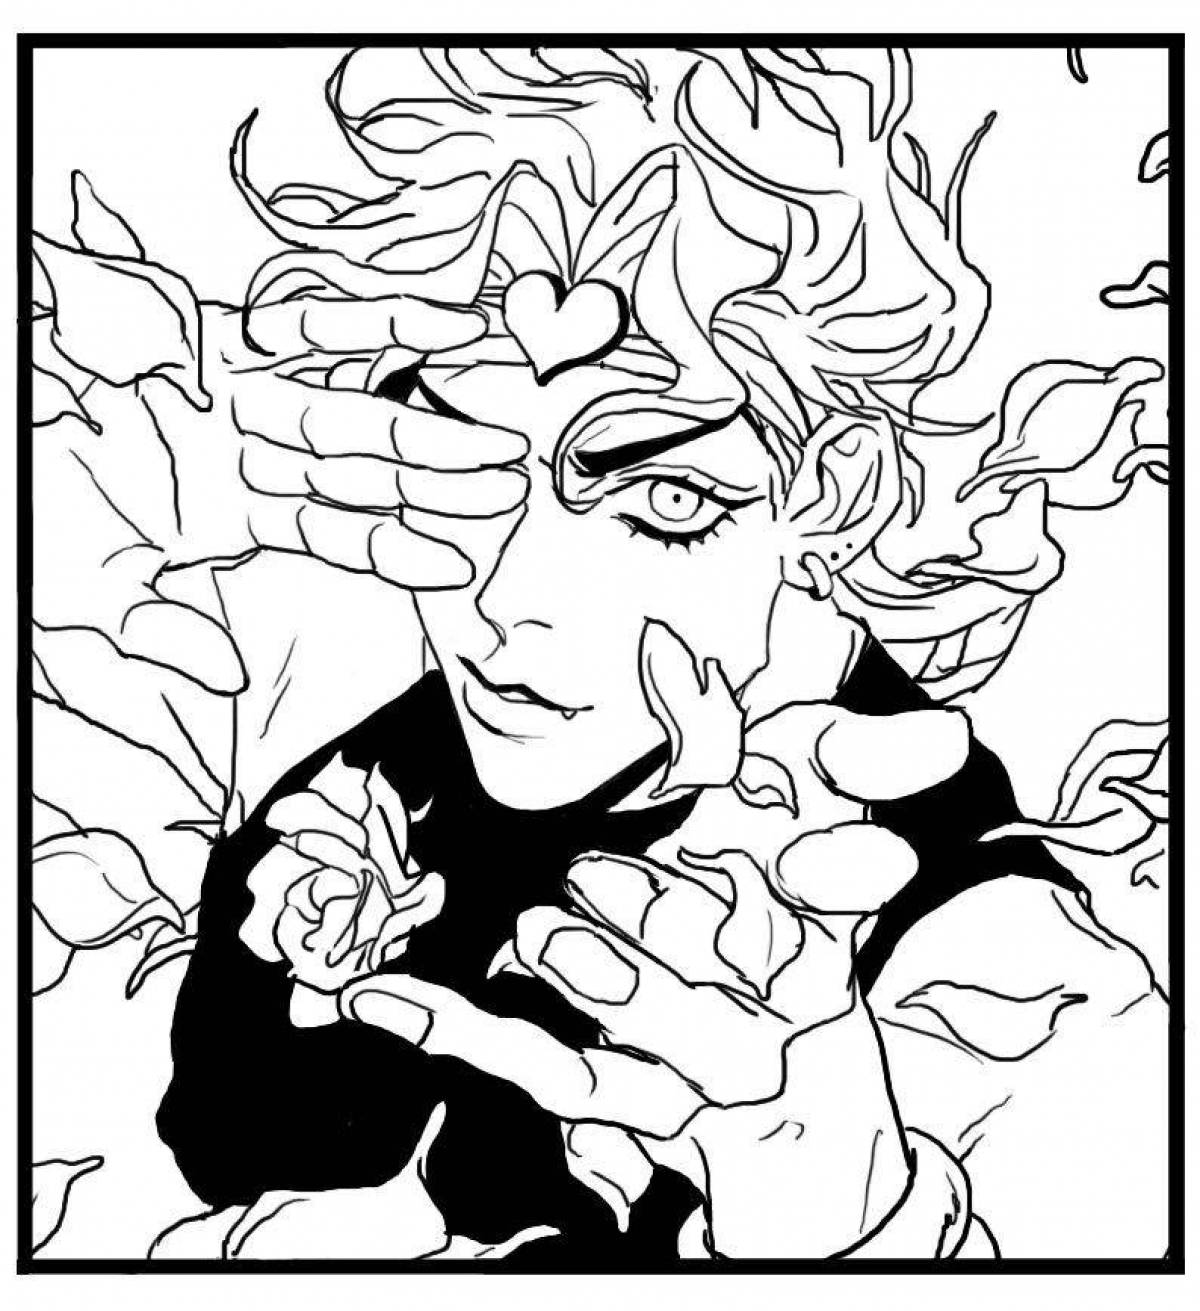 Dio's fancy coloring